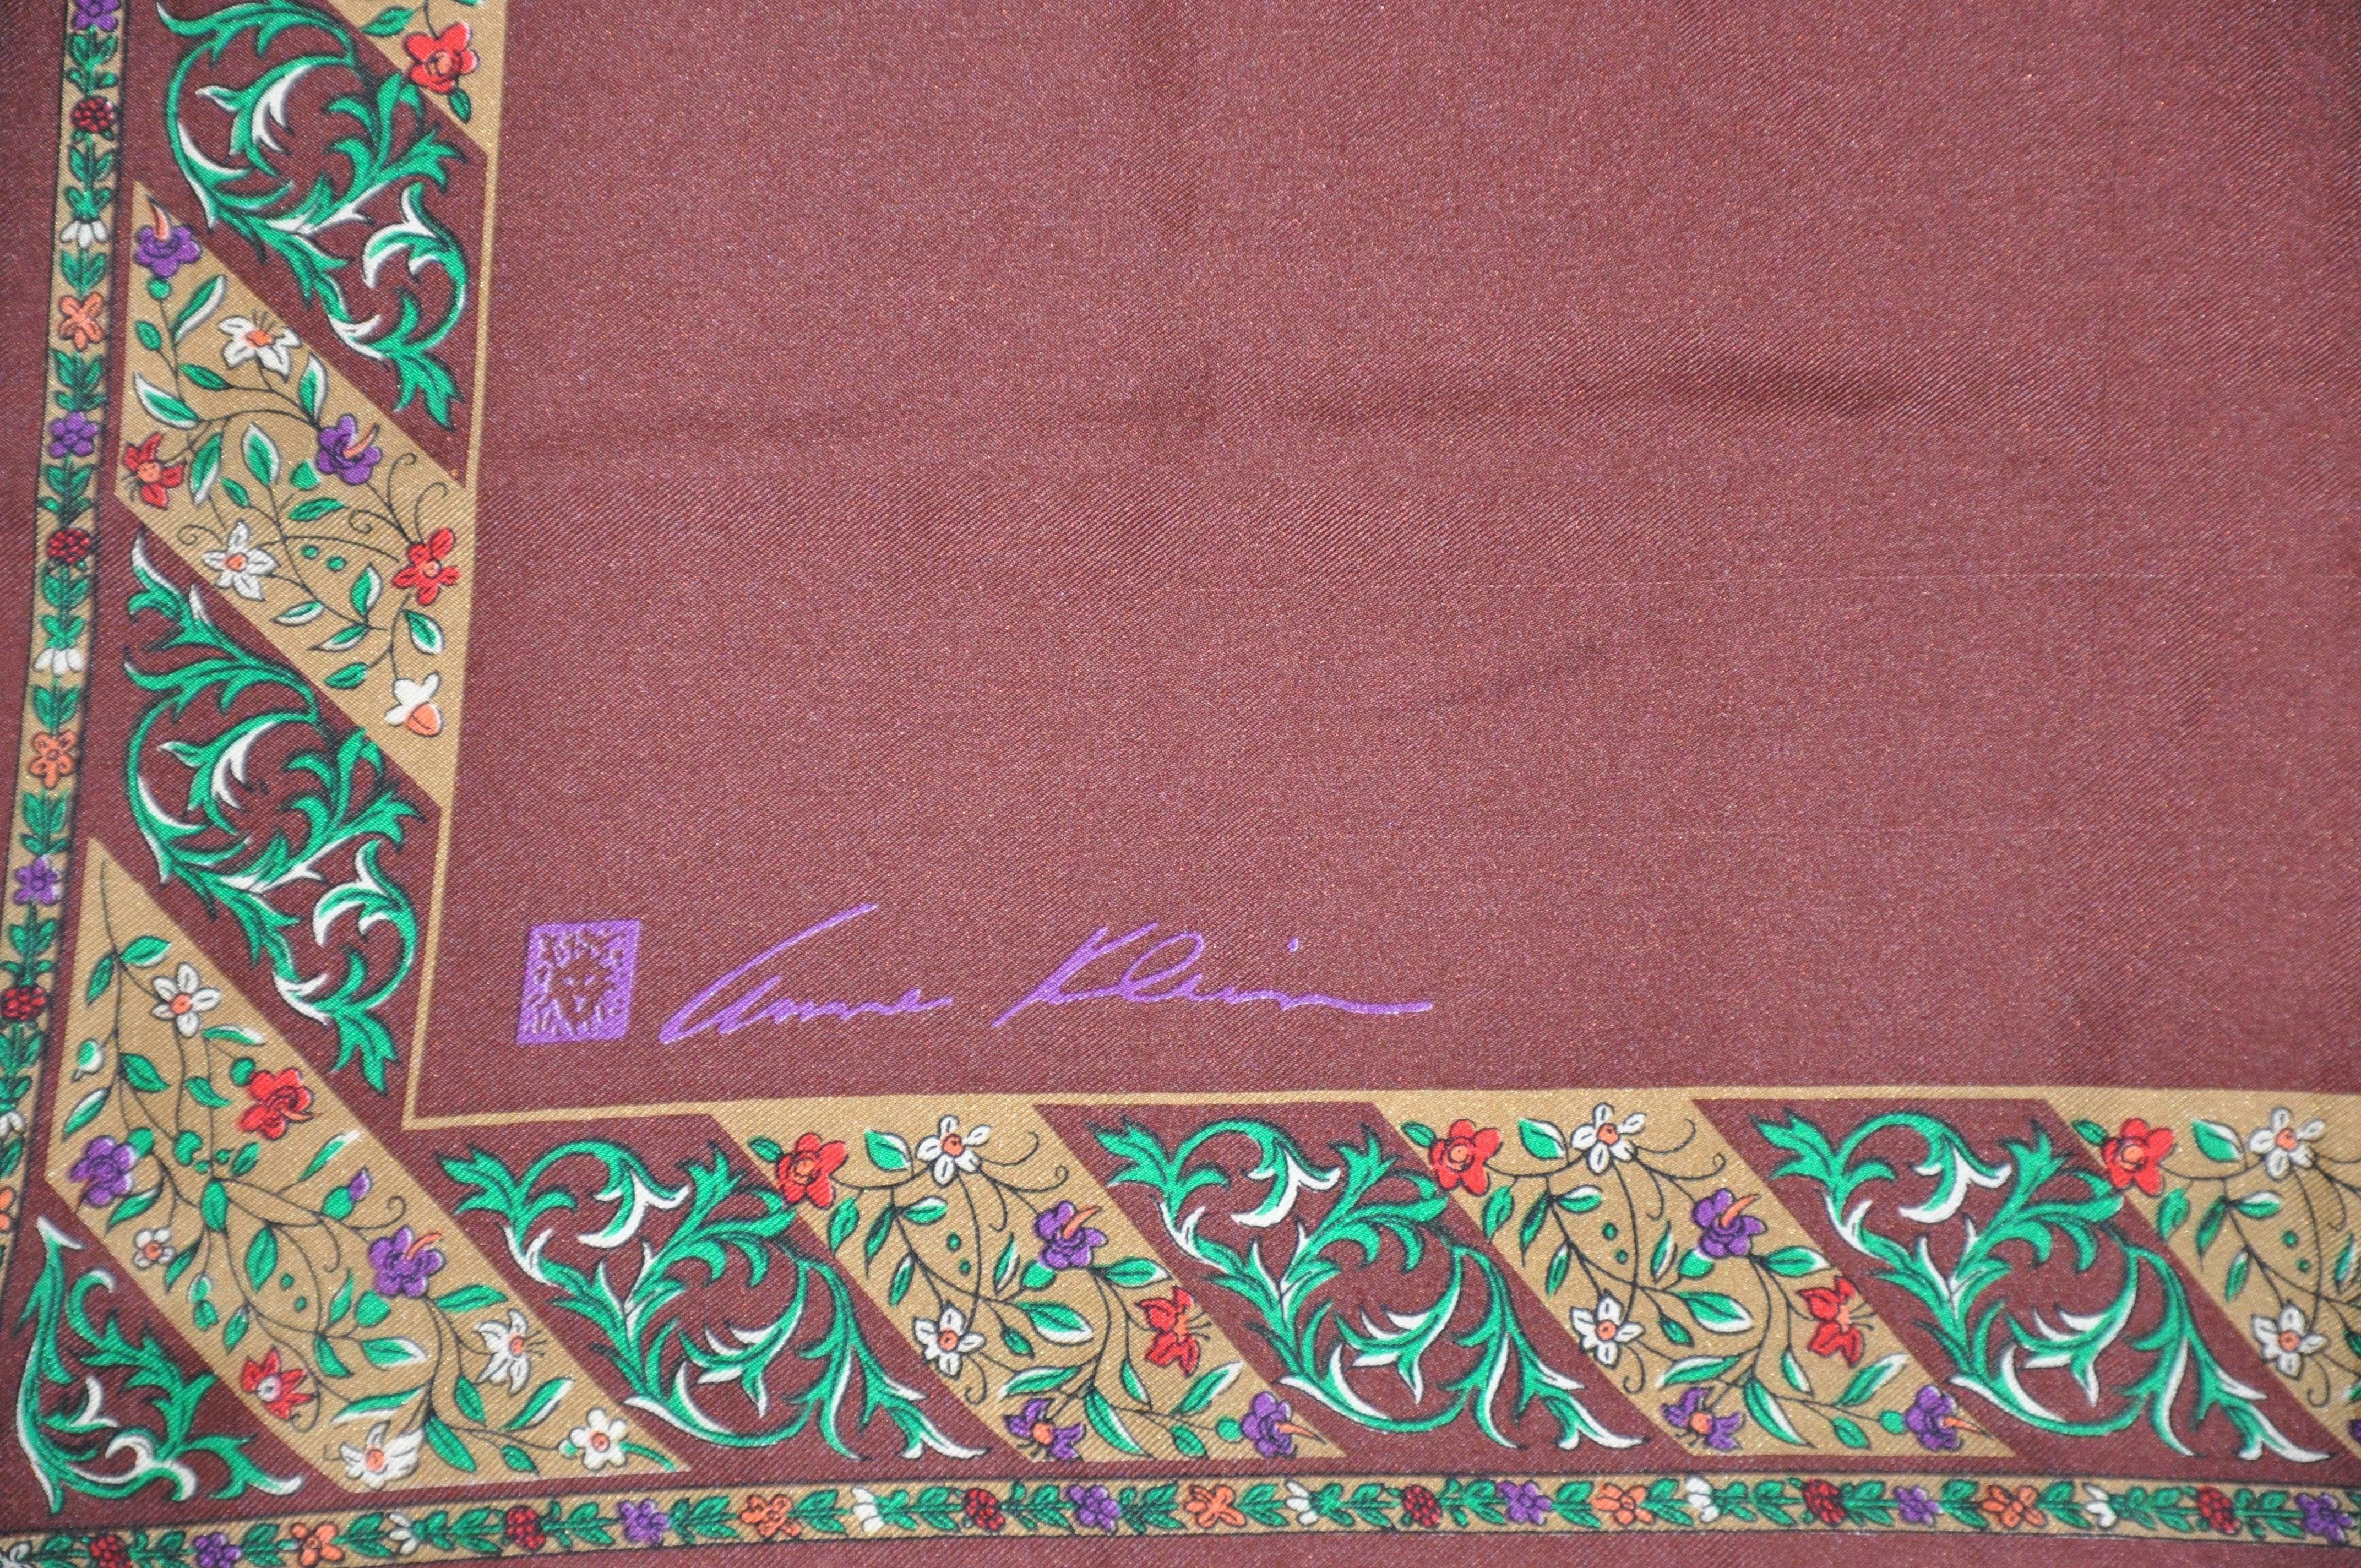        Anne Klein coco-brown silk scarf accented with multi-floral border and finished with hand-rolled edges. Scarf measures 21 inches by 21 inches of silk, and made in Japan.